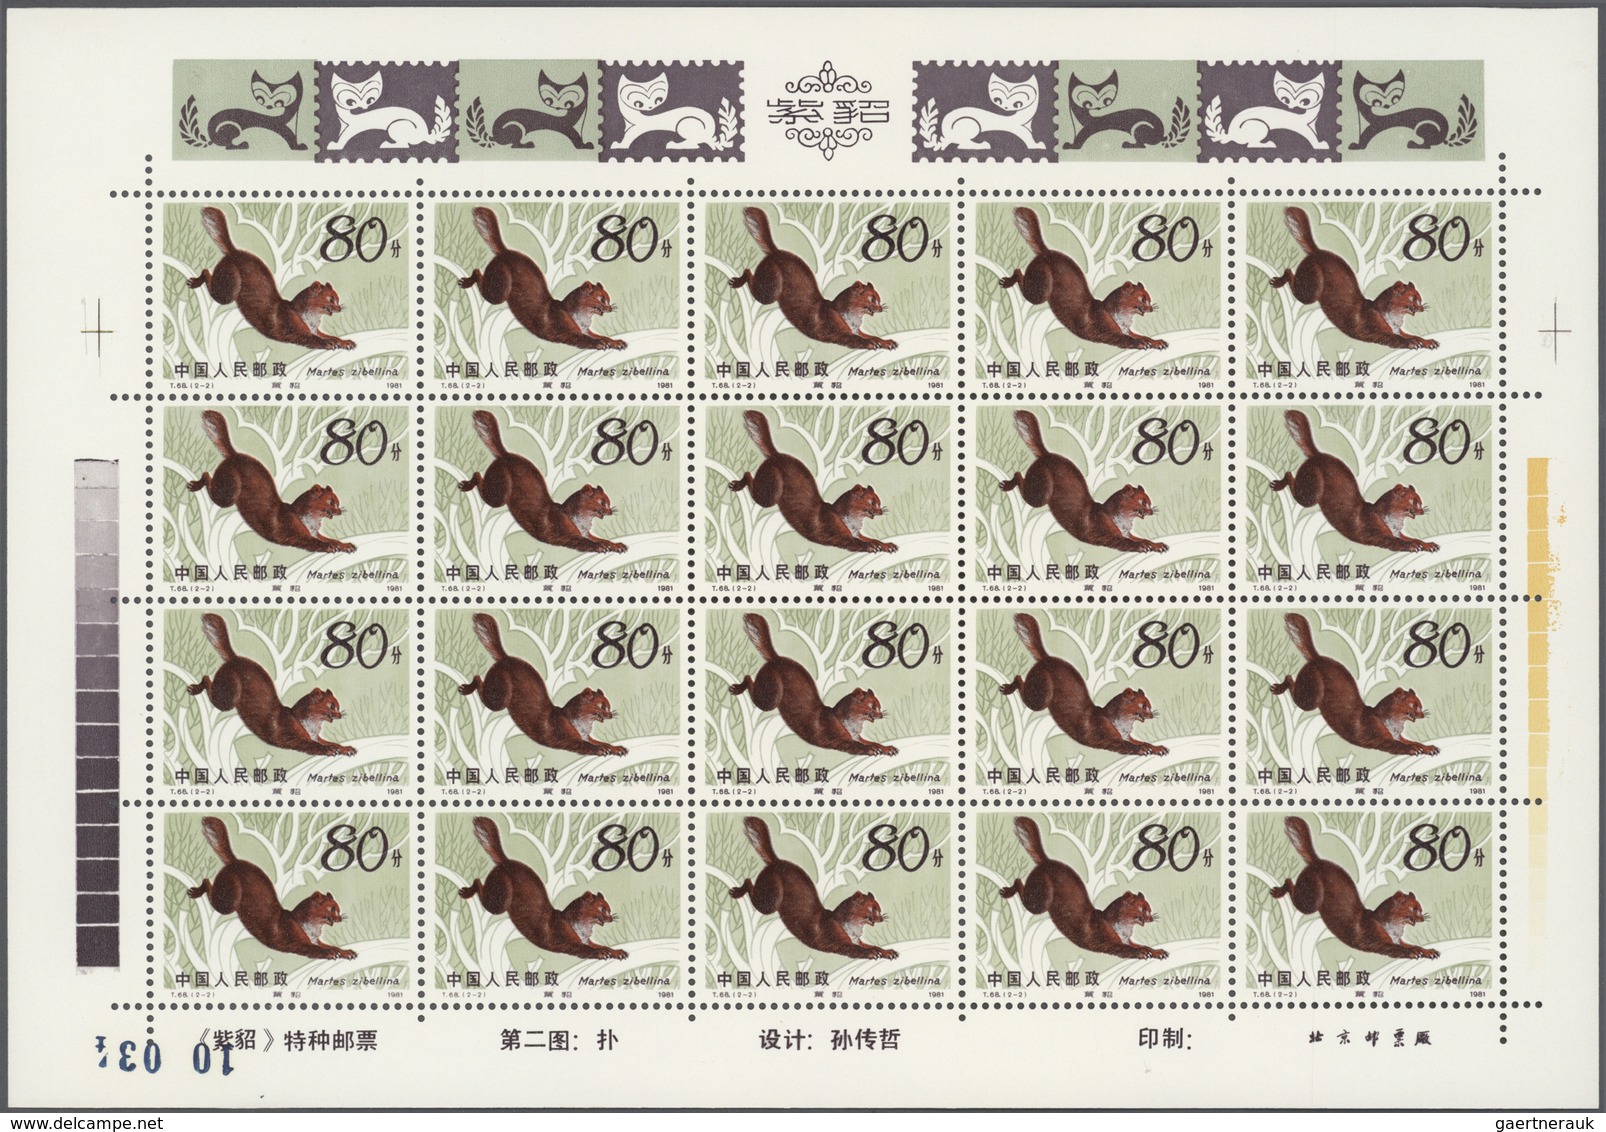 China - Volksrepublik: 1980/82, White Flag Dolphin (T57), and the Sable (T68), both 20 complete sets